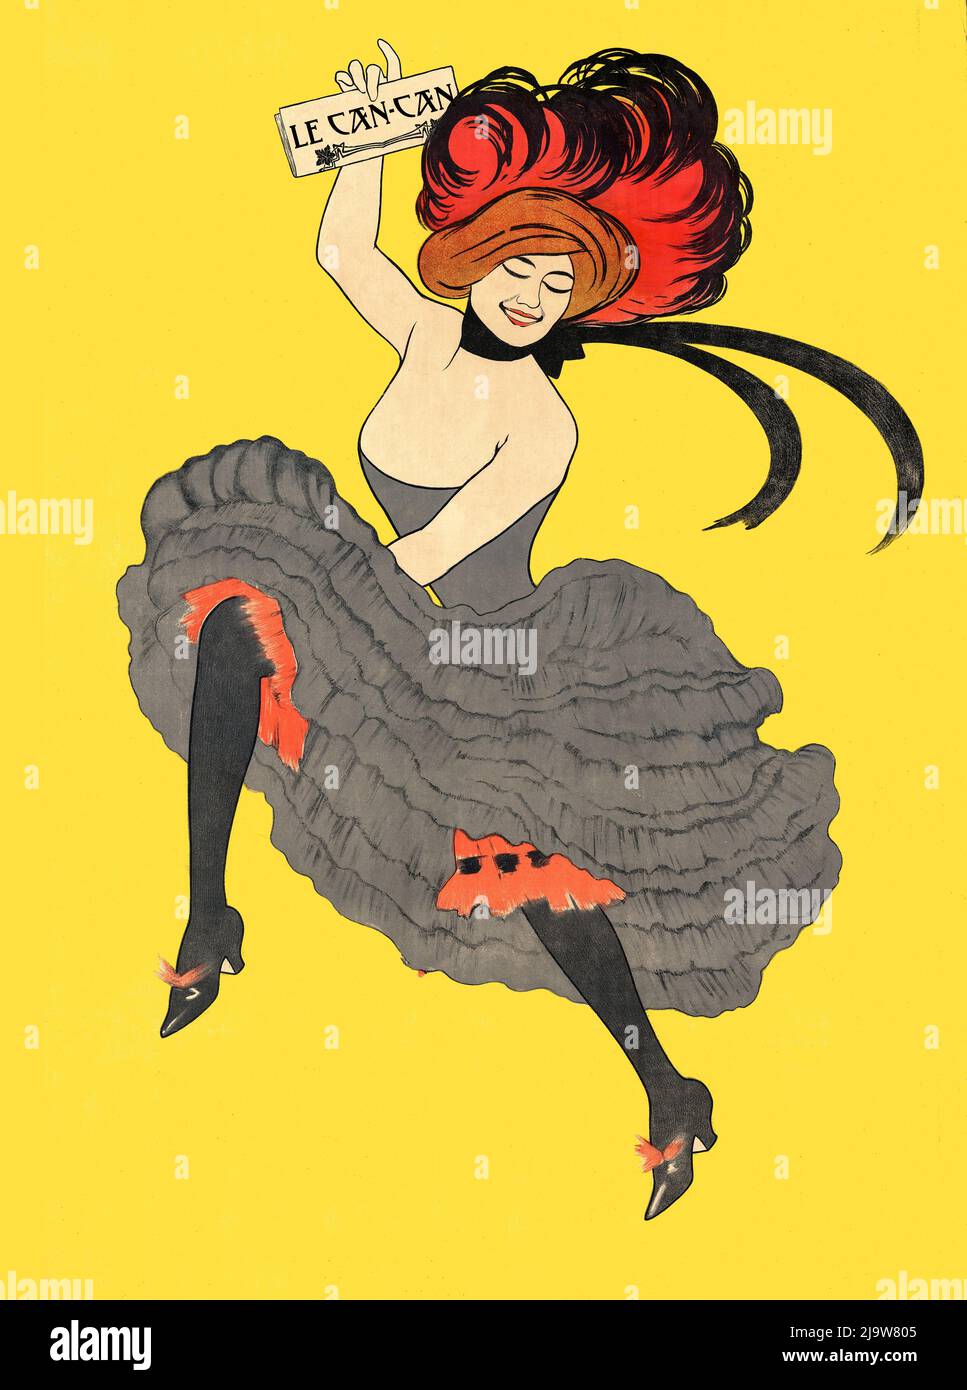 An illustration of a can-can dancer, possibly at  at the Folies-Bergère. The image by  Leonetto Cappiello, (1875-1942) is a detail from an 1899 poster for 'Le Frou Frou', a French newspaper. Stock Photo